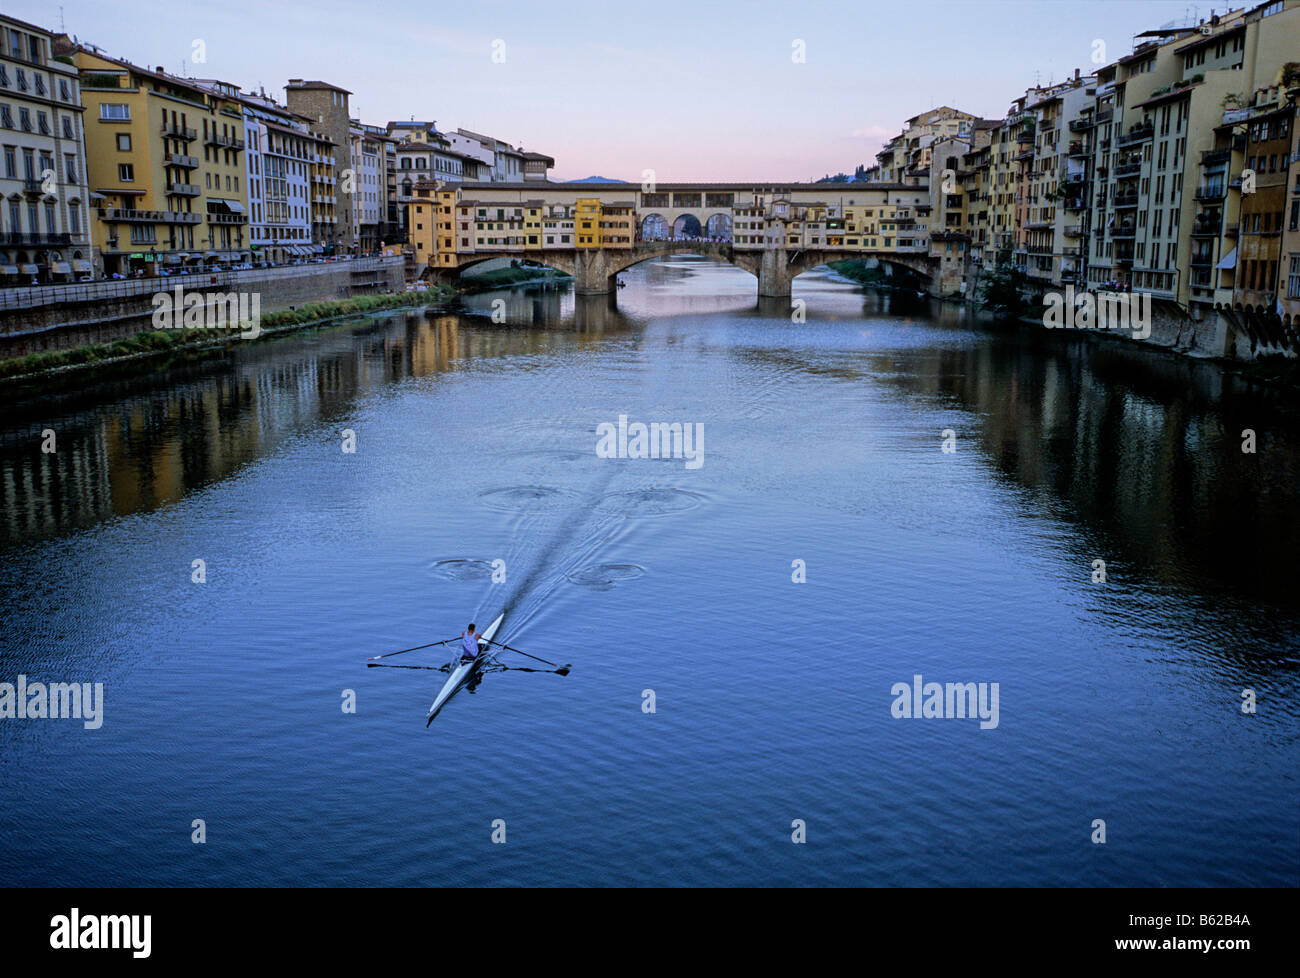 Rower on the Arno River in front of Ponte Vecchio Bridge, Florence, Firenze, Tuscany, Italy, Europe Stock Photo